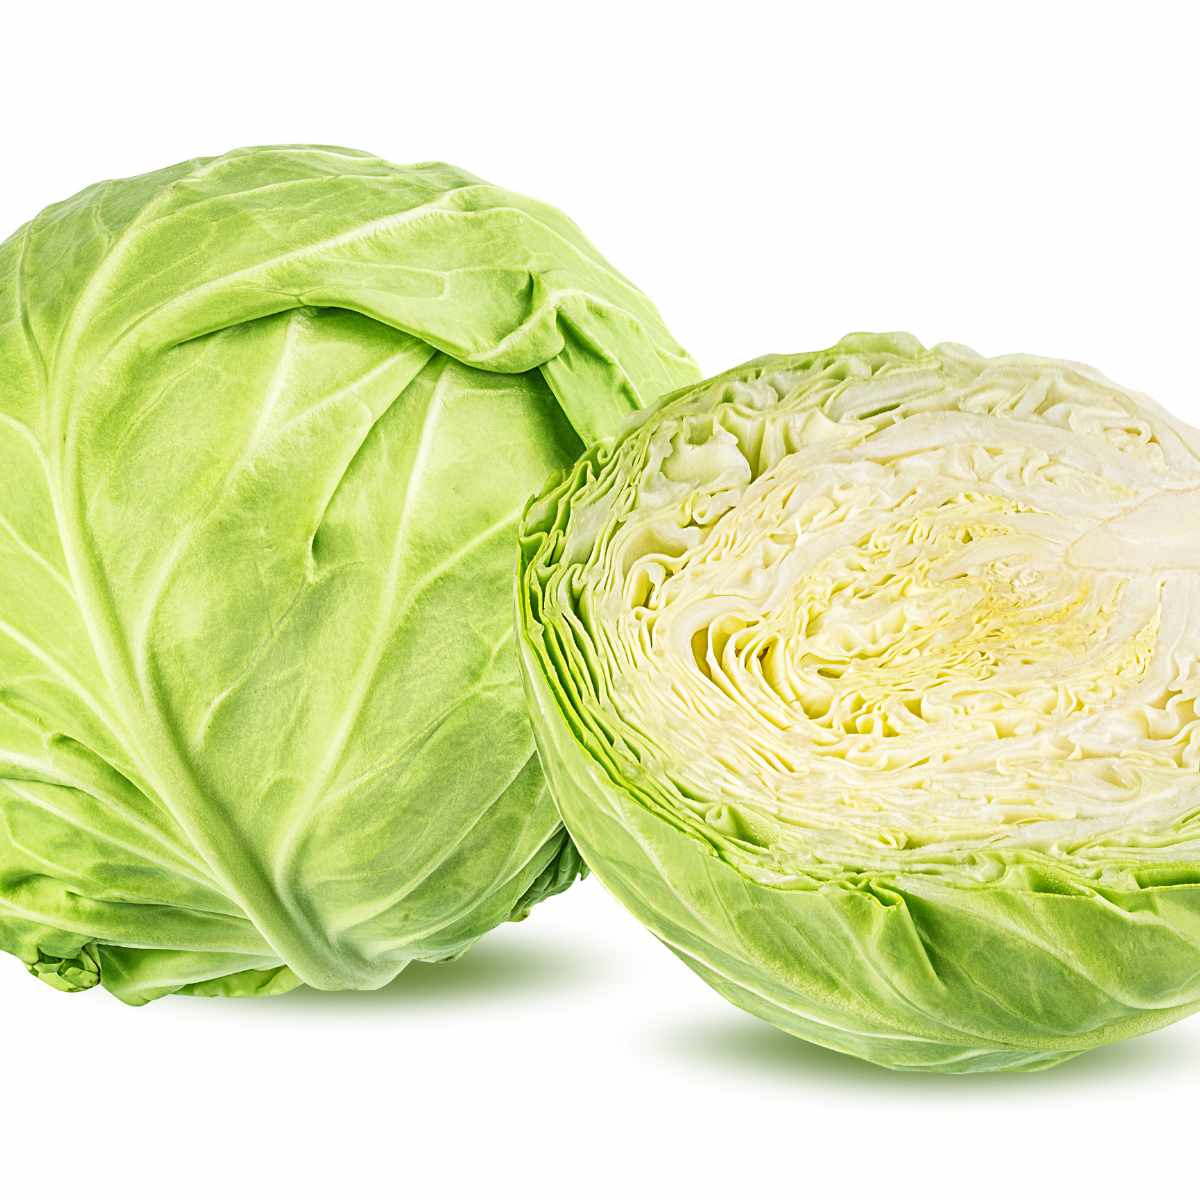 White cabbage on a white background sliced open.